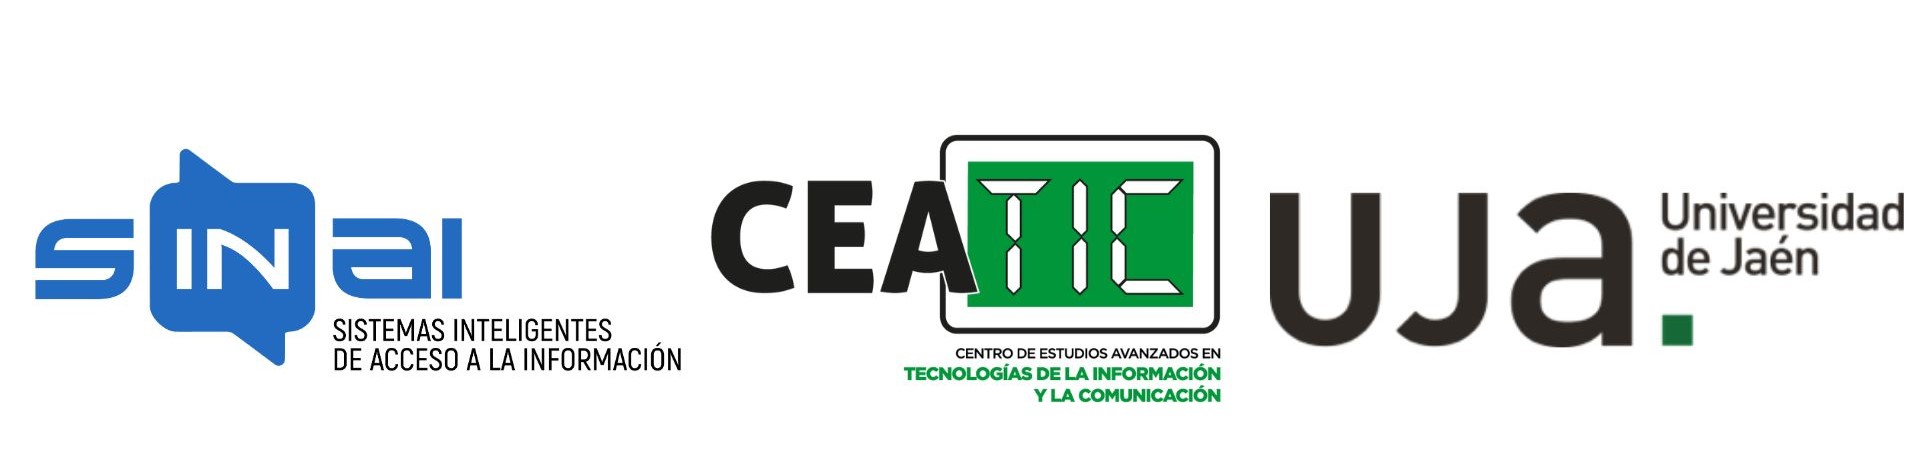 SINAI research group logo, CEATC's logo and the logo of the University of Jaén